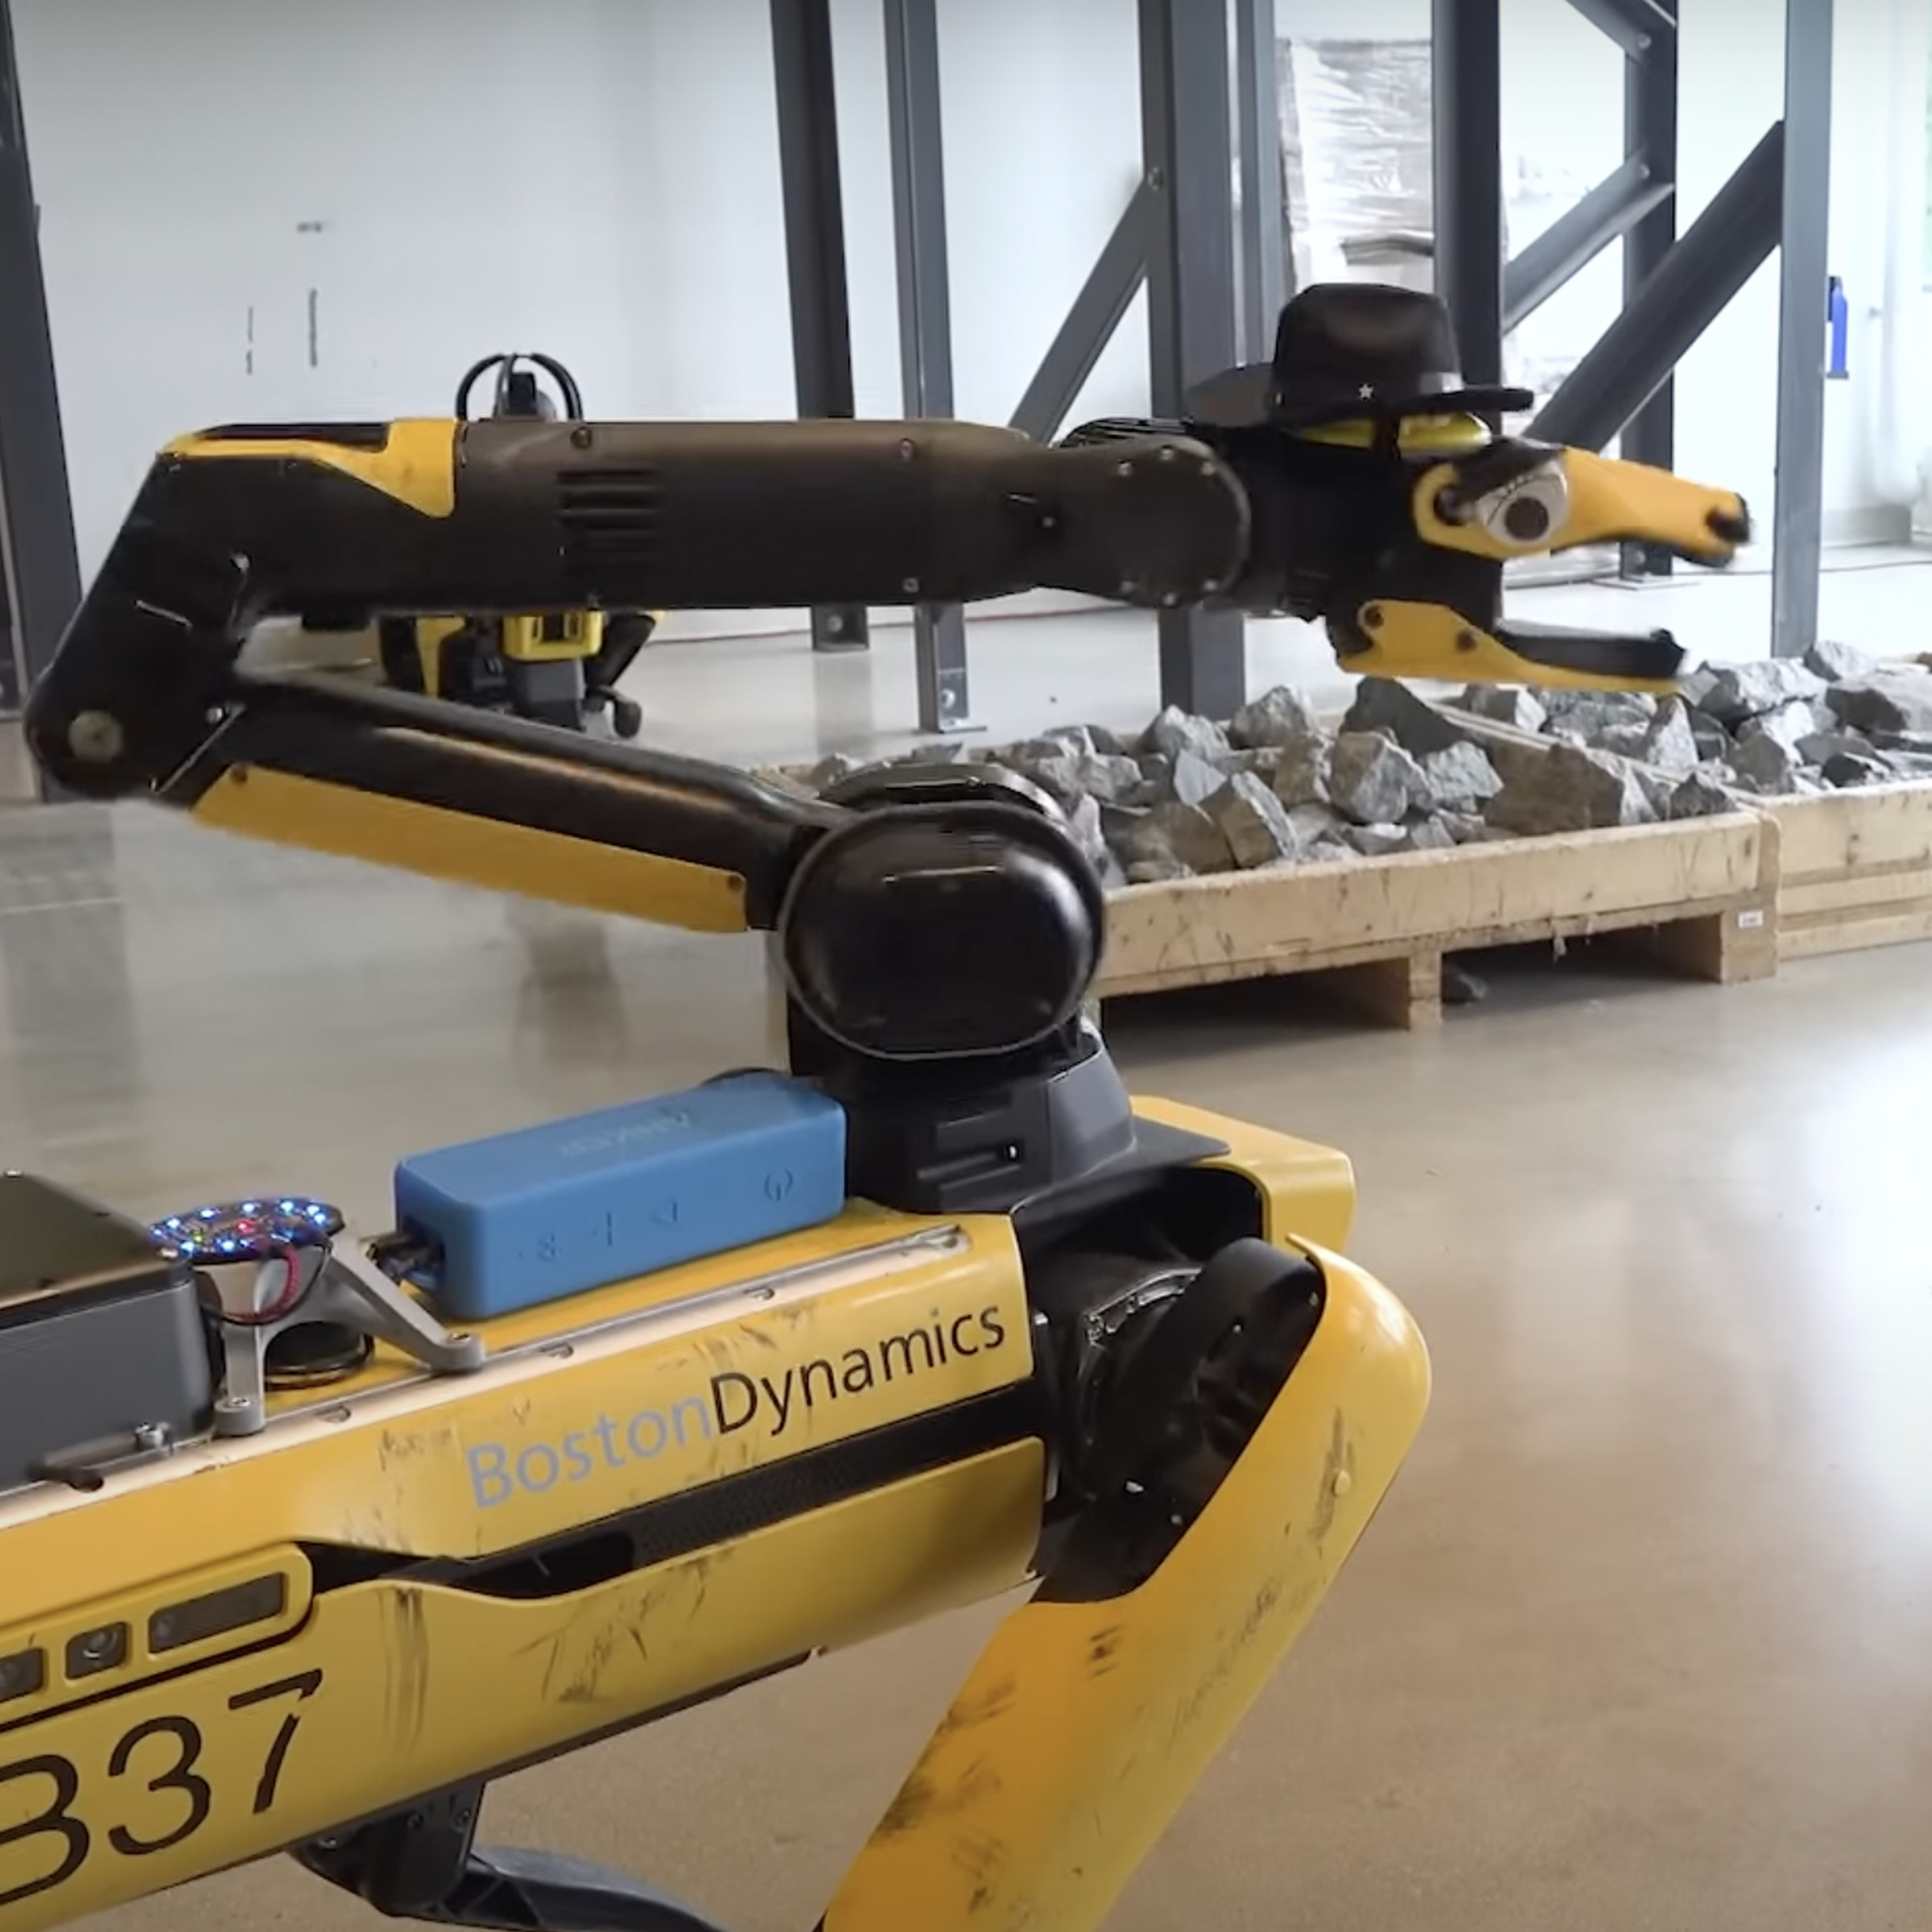 An image showing Boston Dynamics’ Spot robot with a top hat and googly eyes